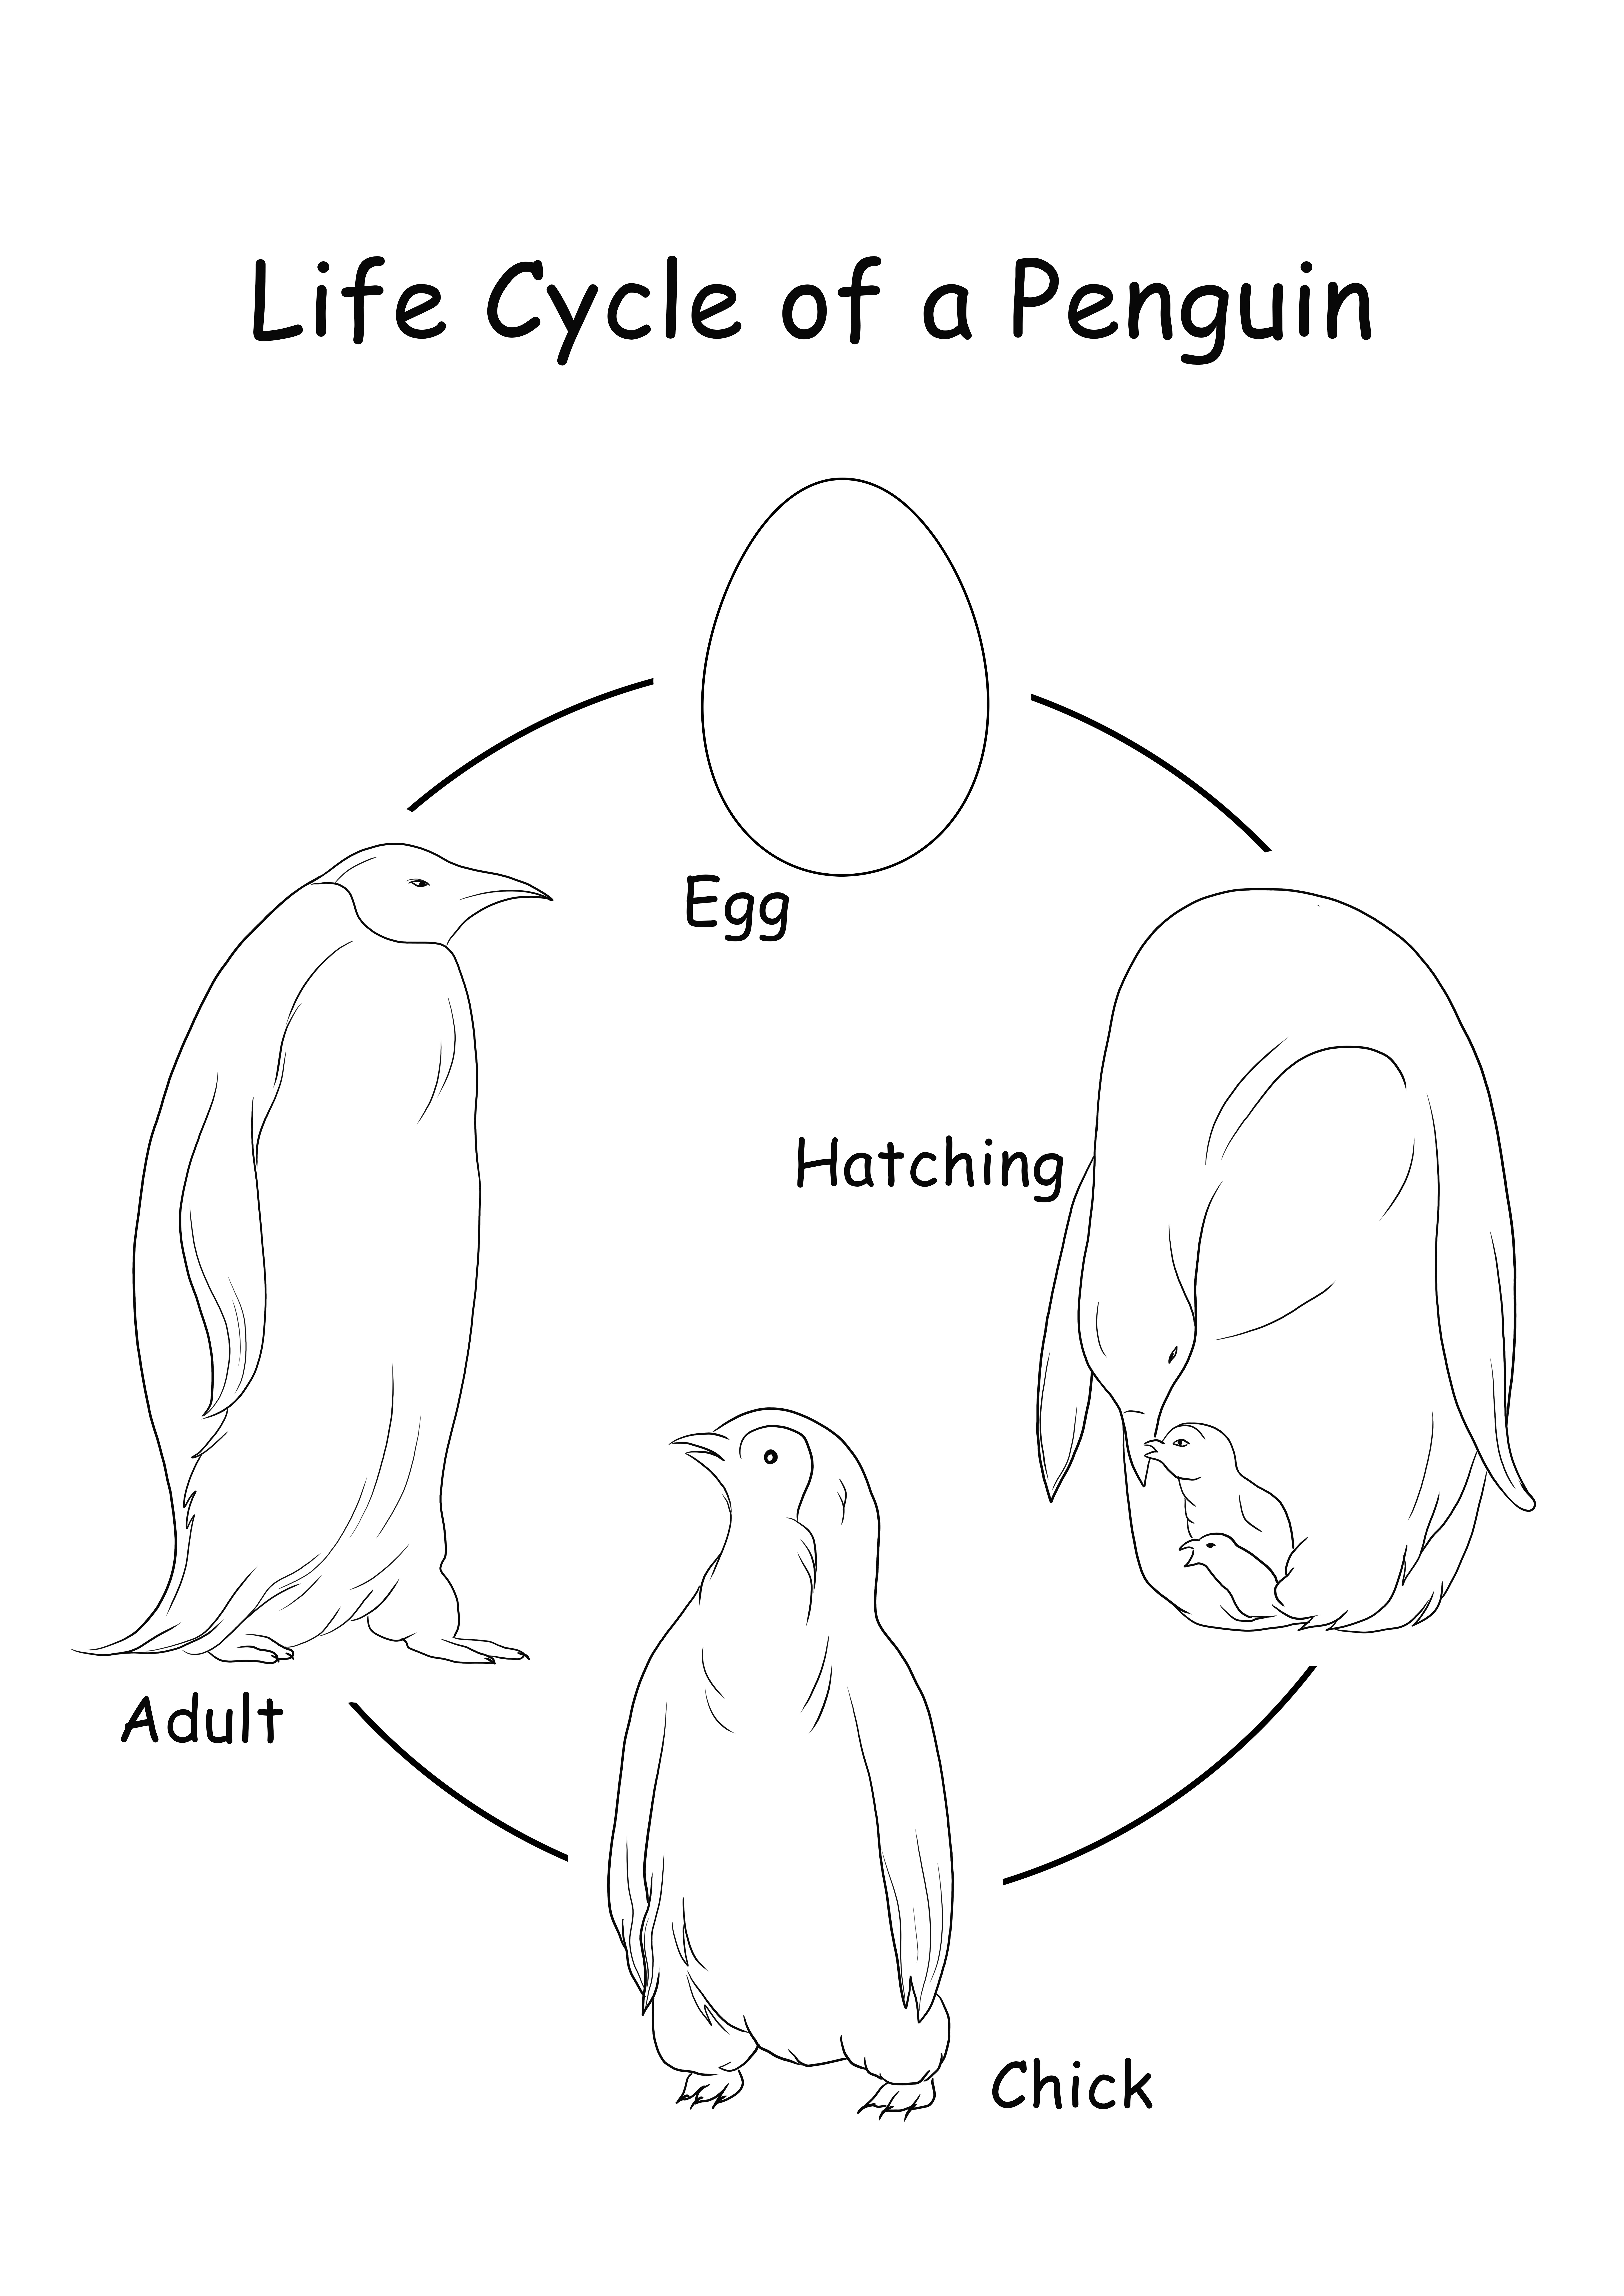 Educational coloring sheet of the Life cycle of a penguin to download for free